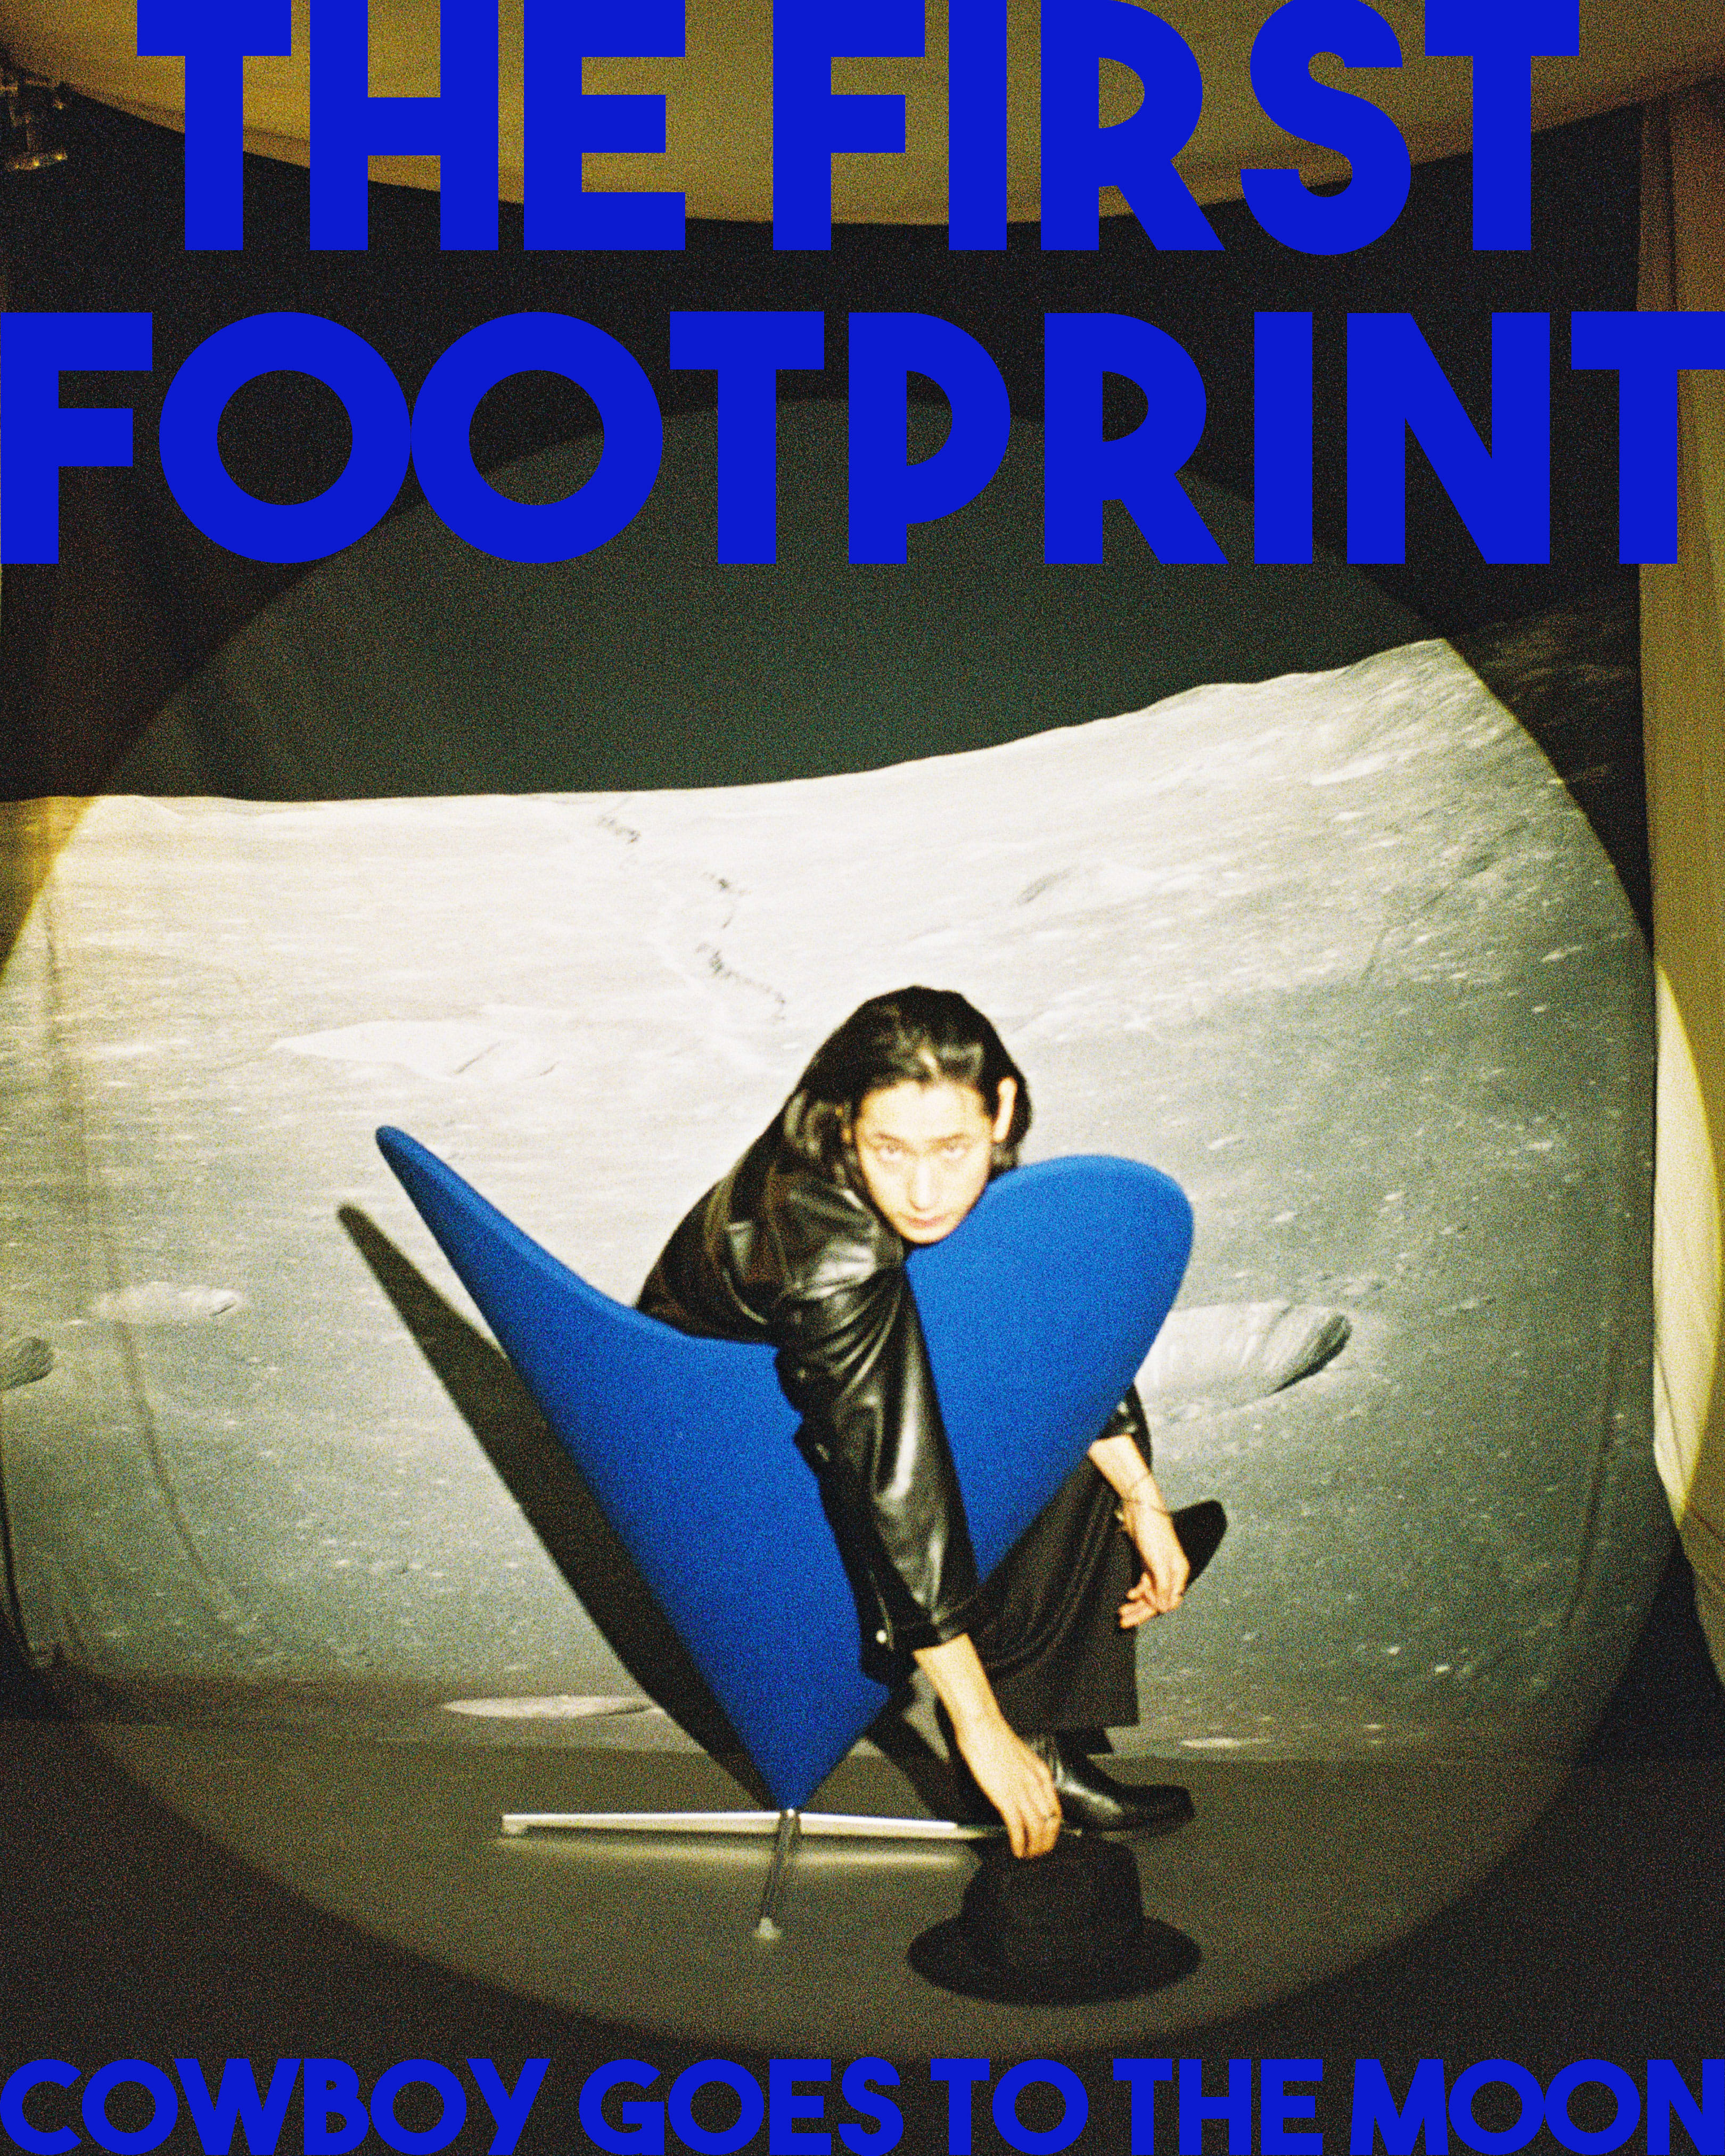 APART FROM THAT EDITORIAL 2021, &quot;THE FIRST FOOTPRINT&quot;